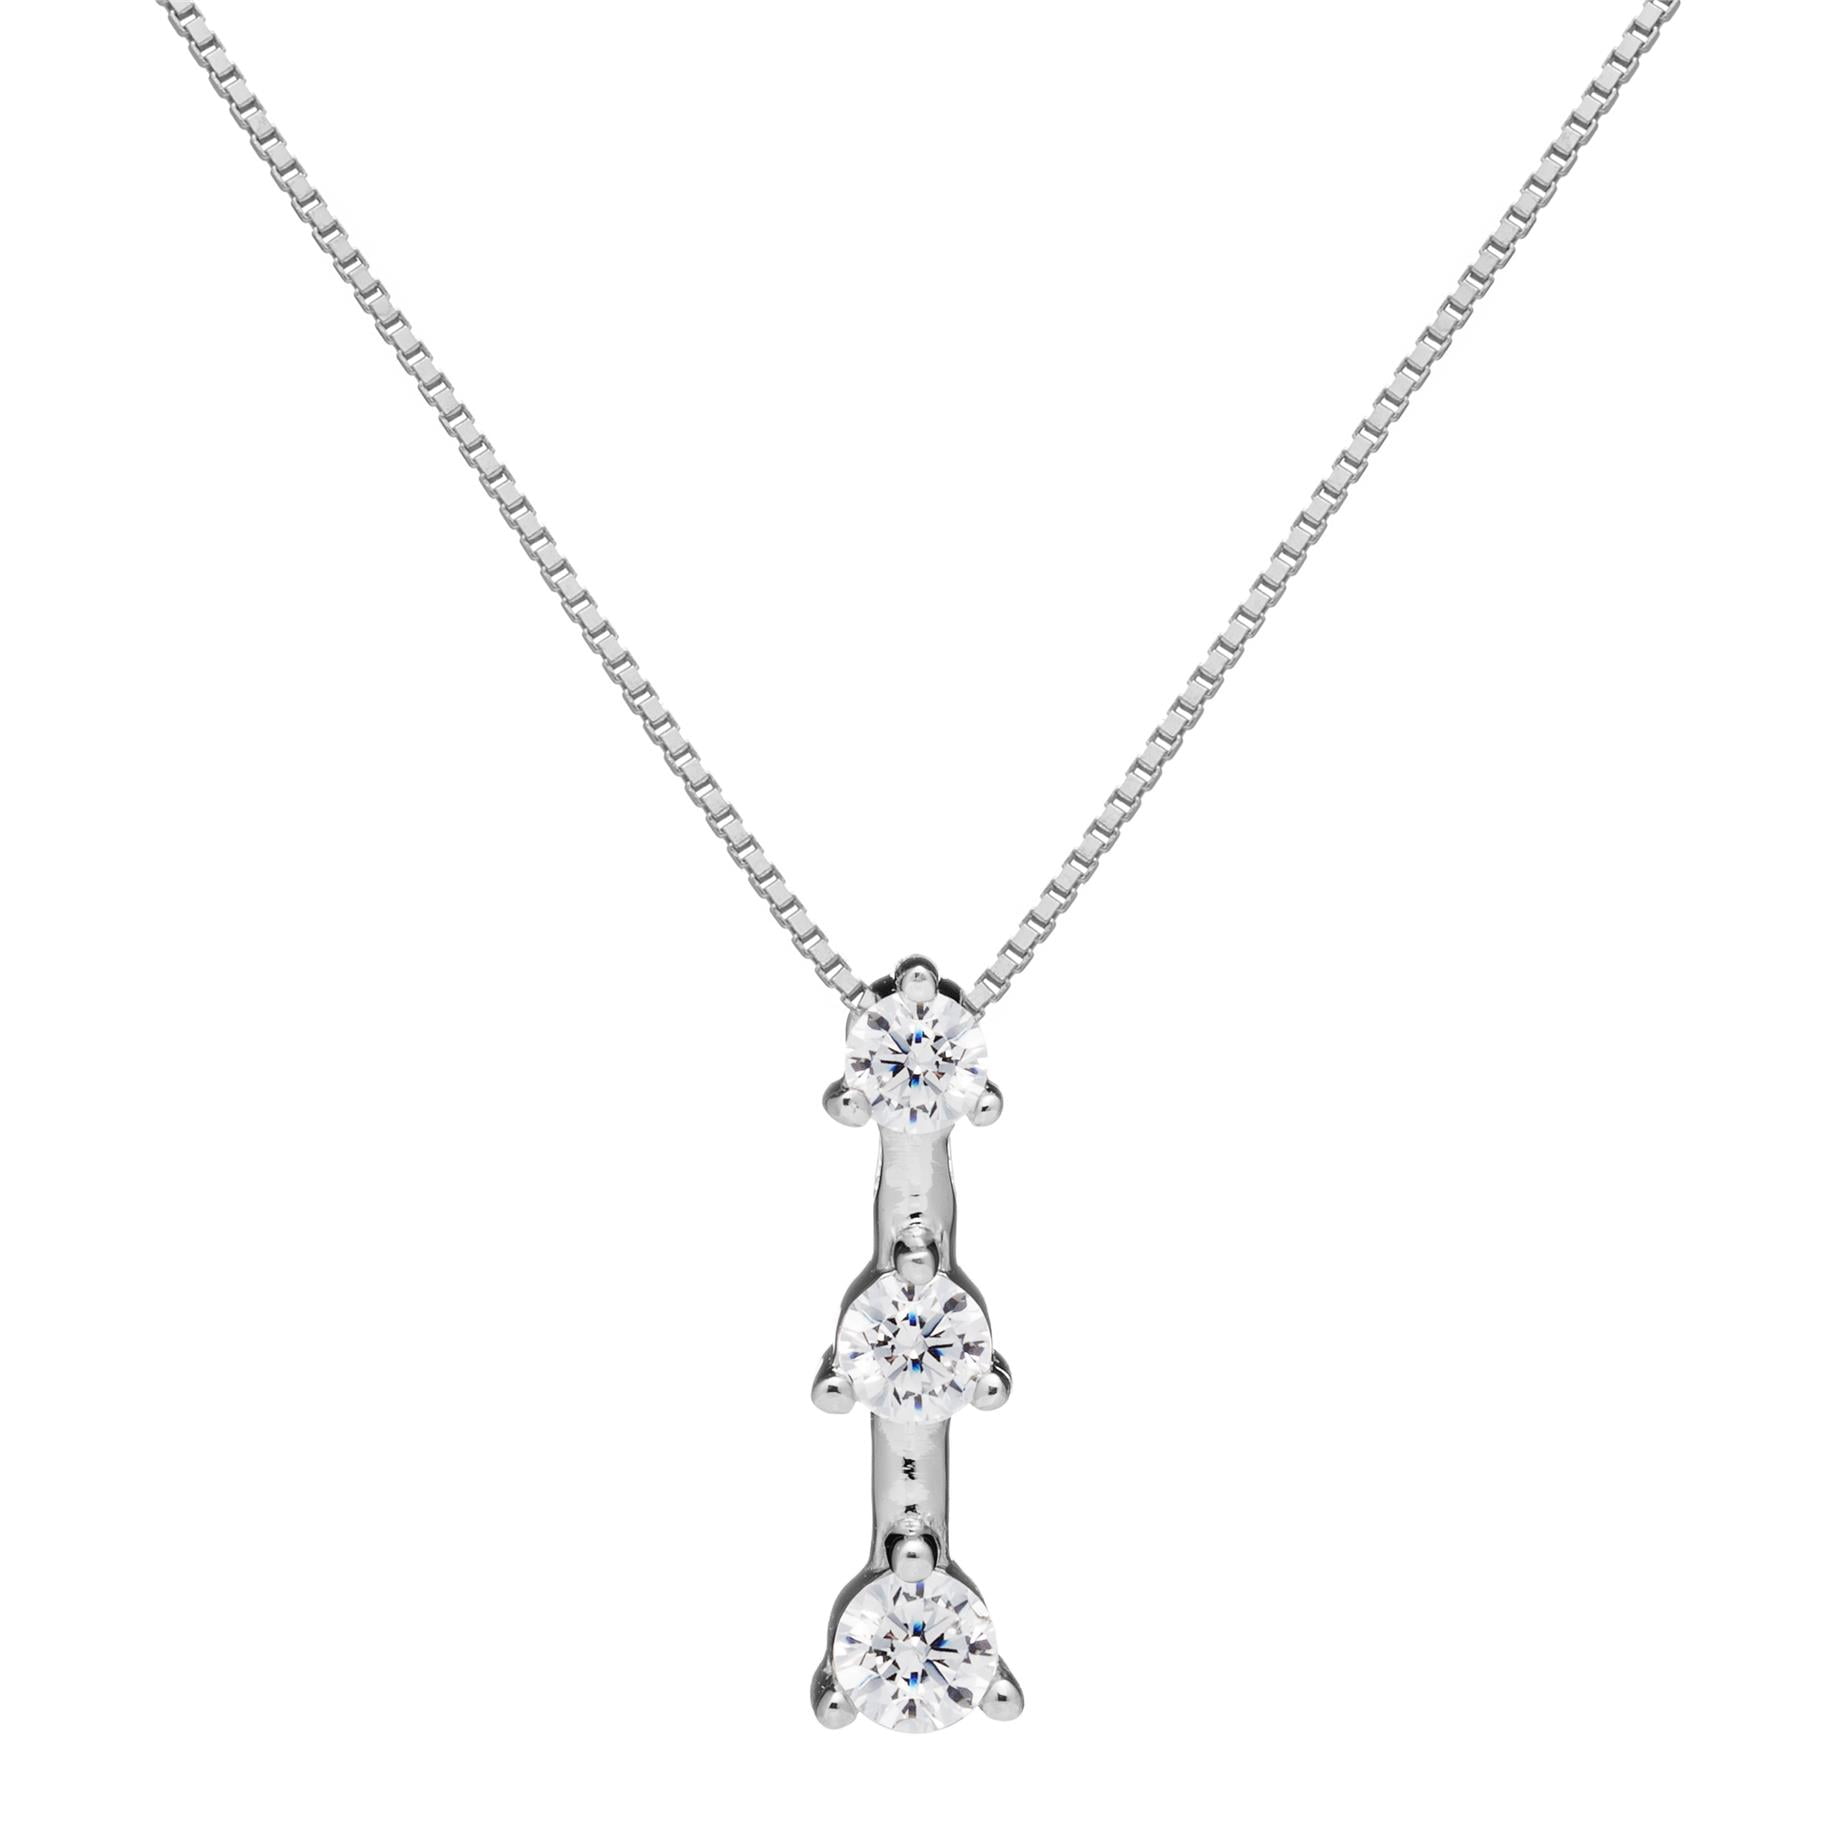 Everyday Elegance - 14K Solid White Gold Pendant Necklace | Round Cut ...